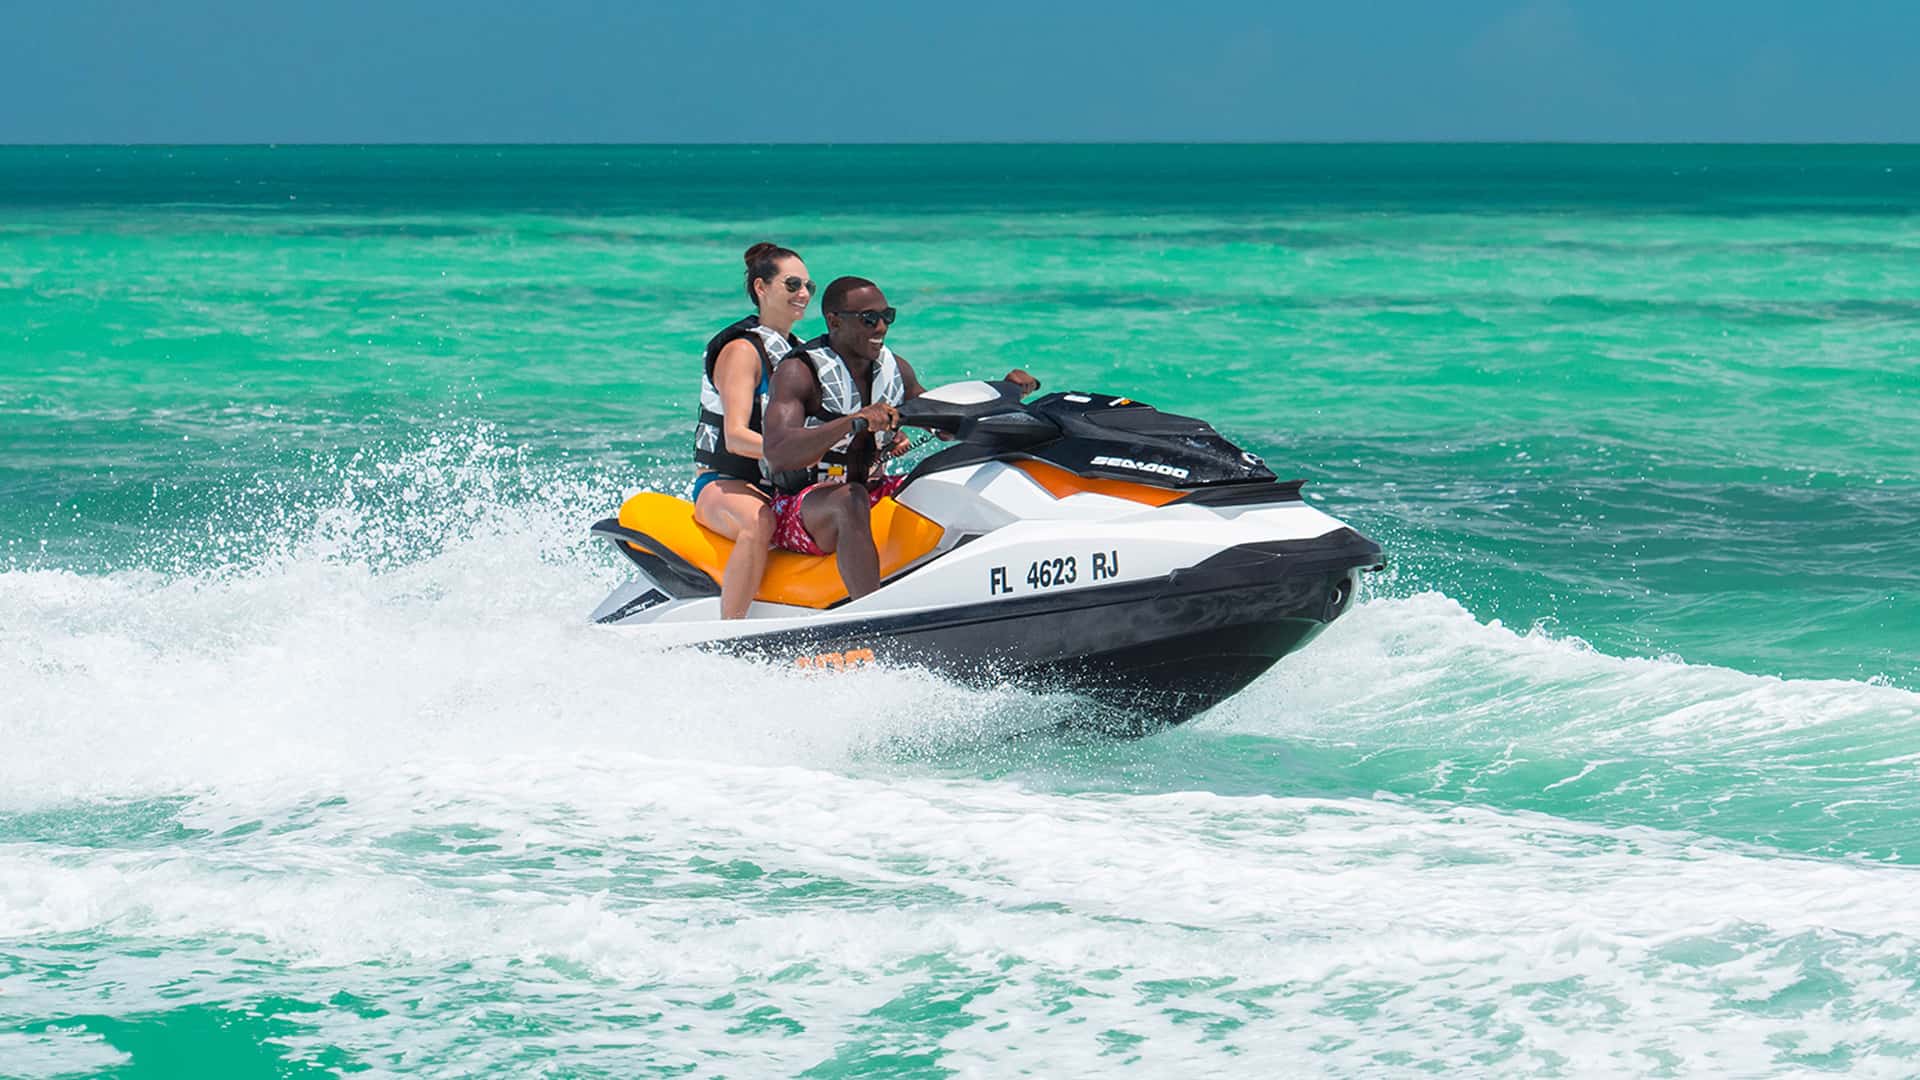 two people on a jet ski